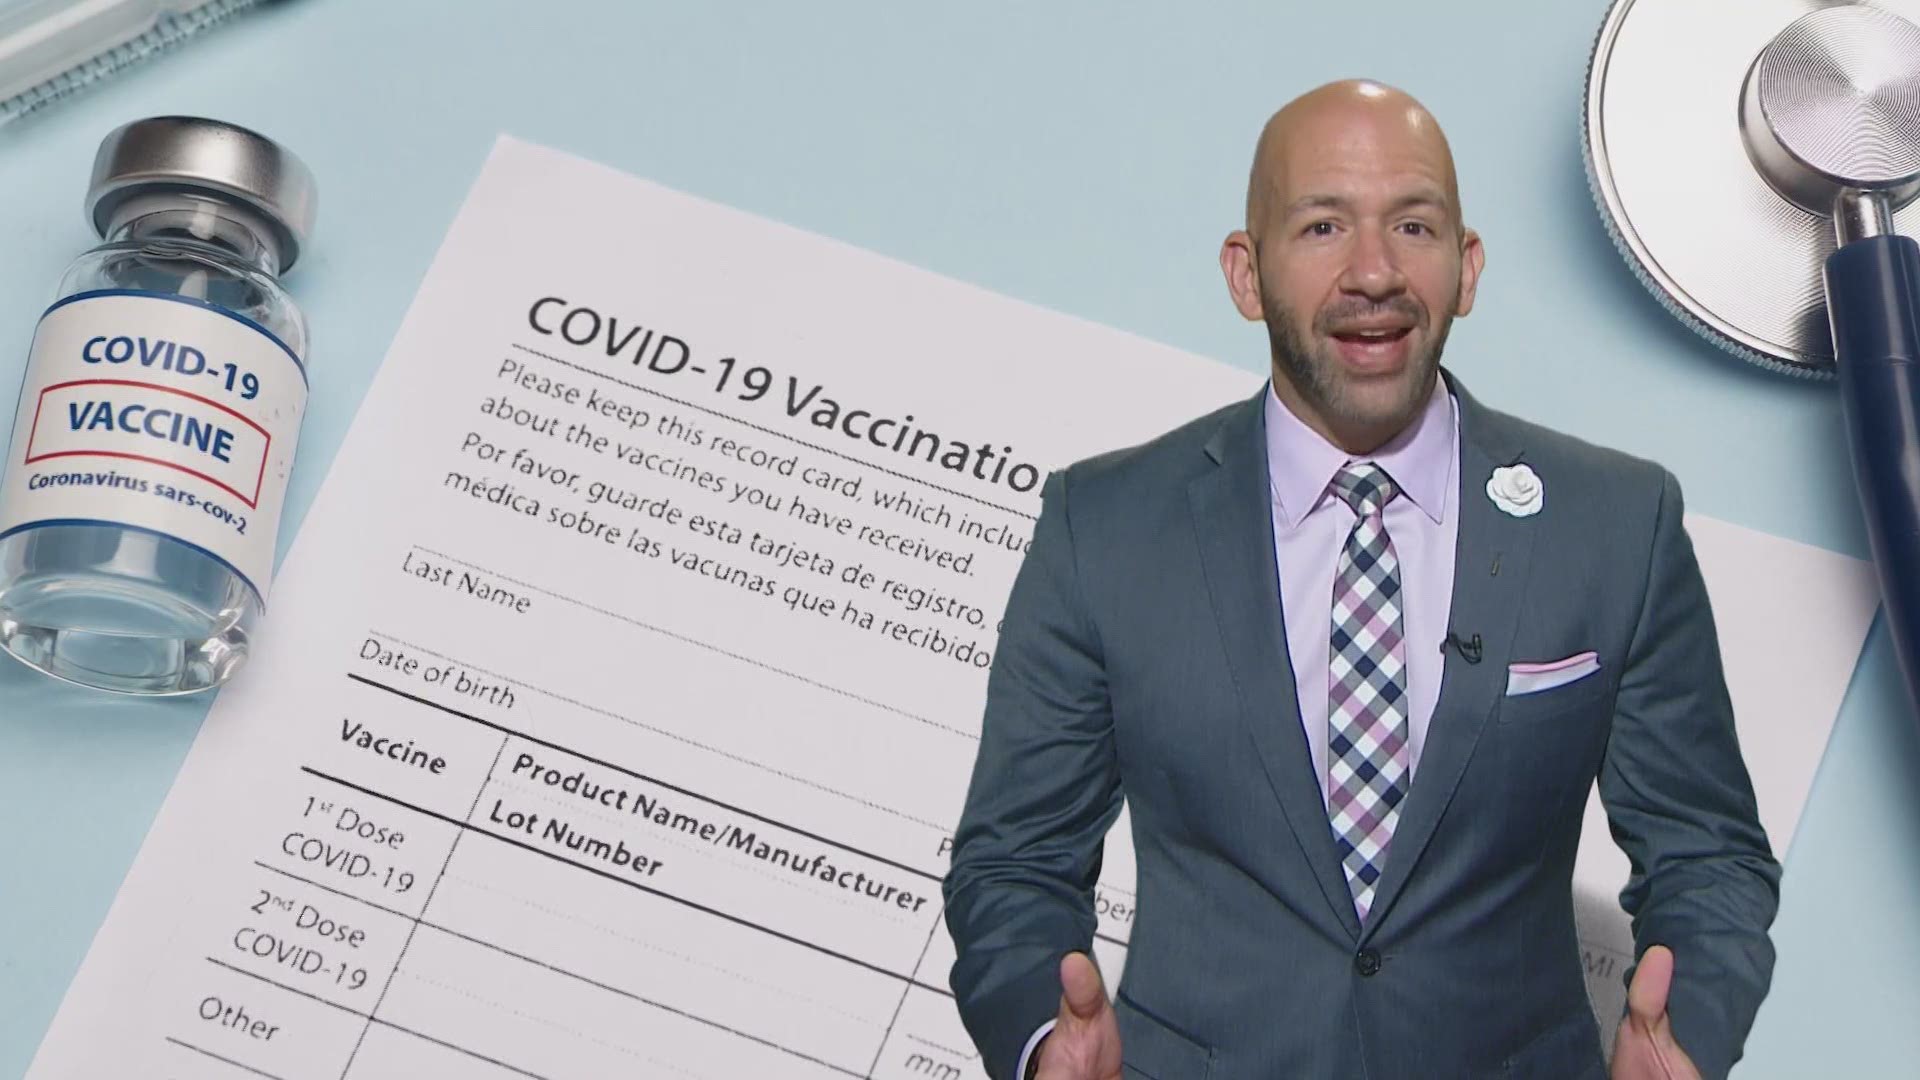 Chris Sadeghi tries to clear up the confusion about whether you should laminate your vaccine card.